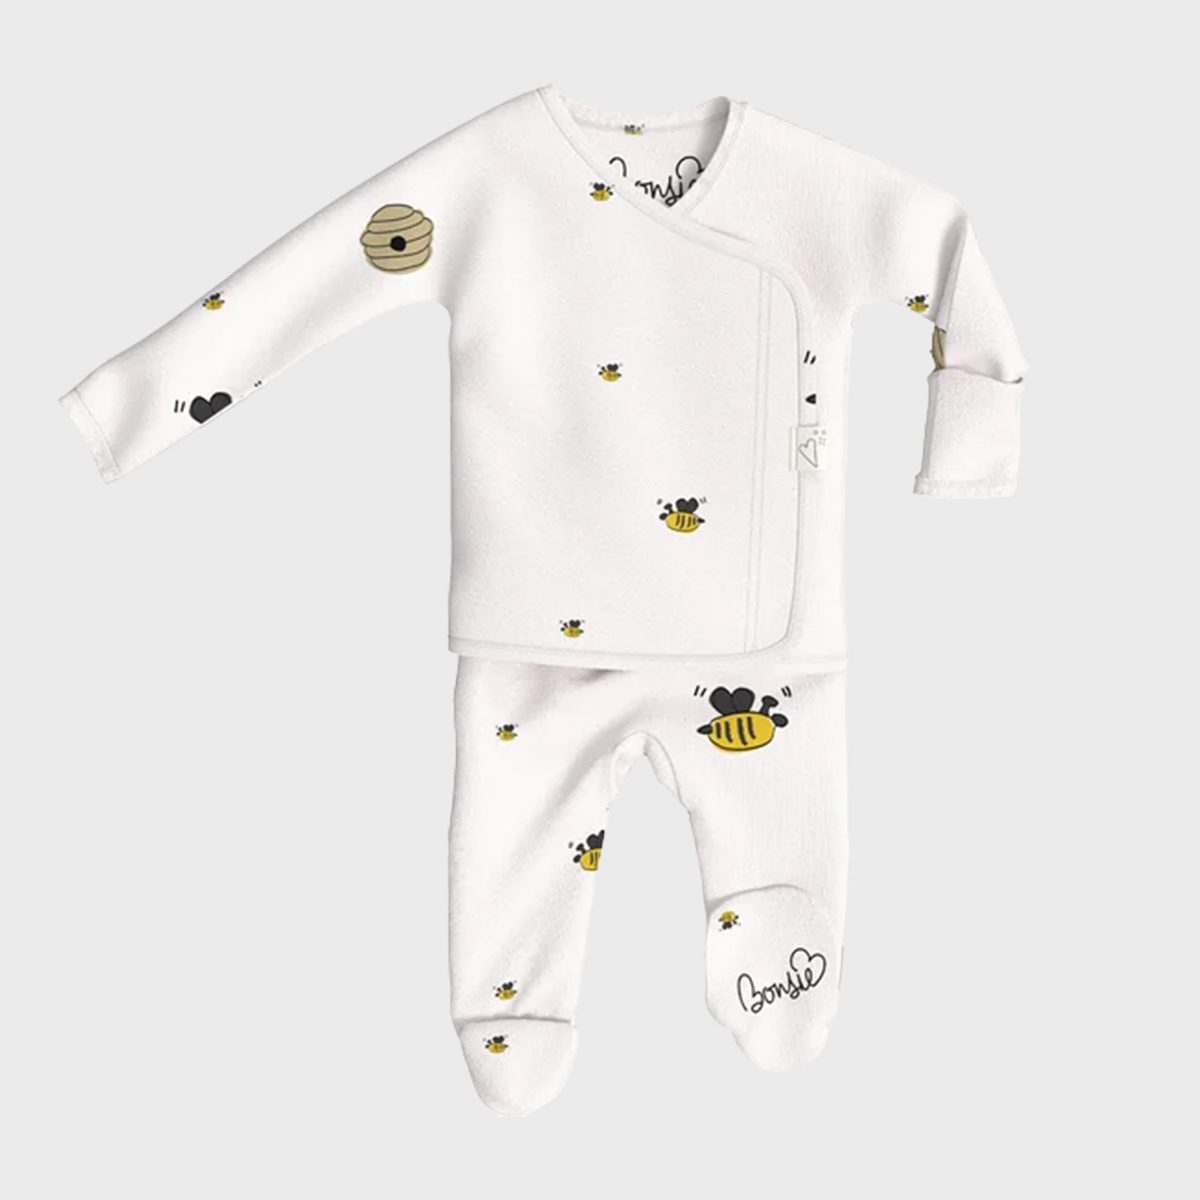 <p>There's nothing sweeter than skin-to-skin time with a brand-new baby. This <a href="https://www.maisonette.com/product/bonsie-baby-footie-bees-honey" rel="noopener noreferrer">footed onesie</a> makes that special bonding time easy to do no matter where you are. This buttery soft onesie has two double-layered flaps that open to expose the baby's chest and belly for that much-needed skin-to-skin connection. They also have an elastic waistband which allows for easy dressing and diaper changes.</p> <p class="listicle-page__cta-button-shop"><a class="shop-btn" href="https://www.maisonette.com/product/bonsie-baby-footie-bees-honey">Shop Now</a></p>